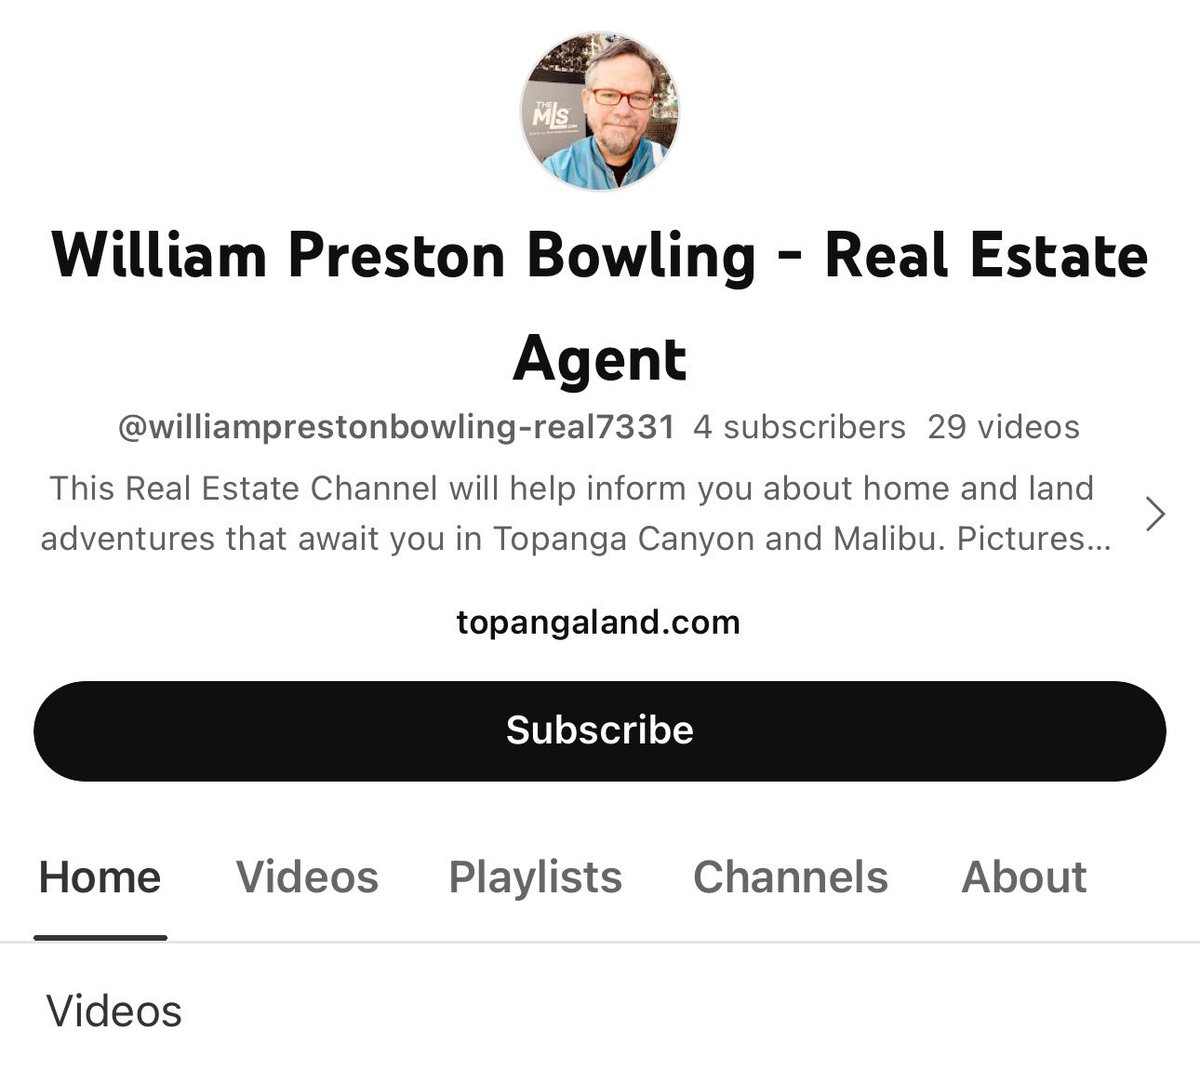 Subscribe to My YouTube Channel - I never thought I would hear myself say that 😂 lol - DRE 01393337 @sothebysrealty #realestate #buyingandselling #youtube #sircletheglobe #sirnewdev #community